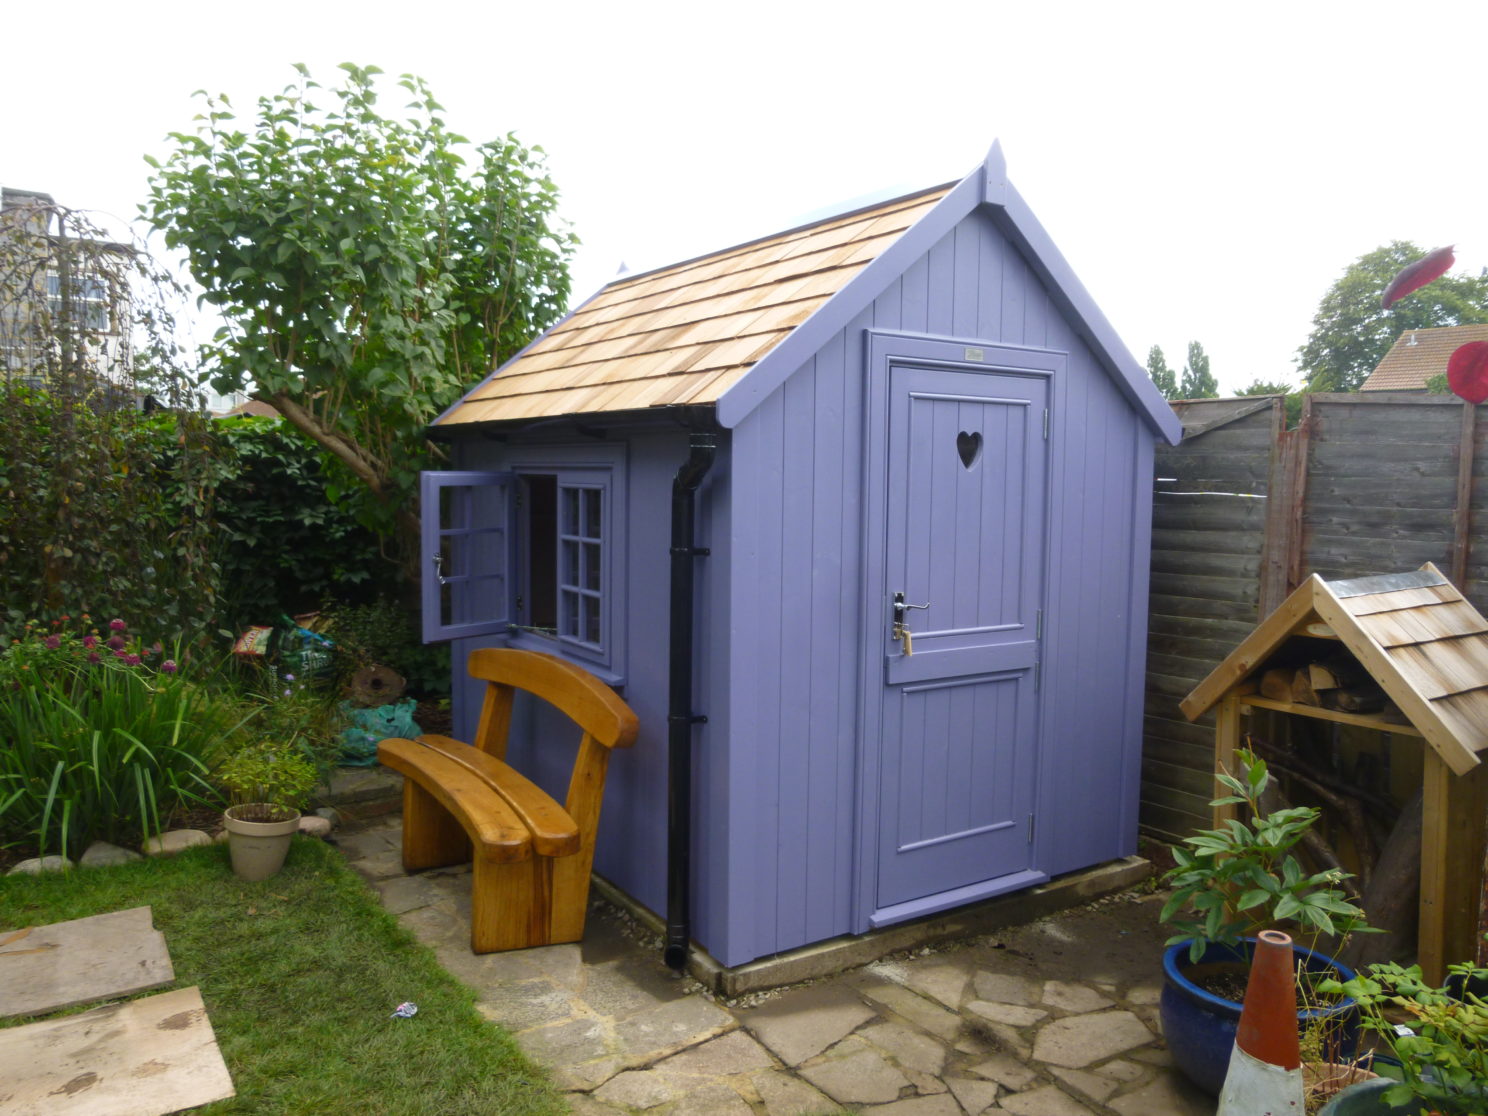 Posh Shed of the Year Awards